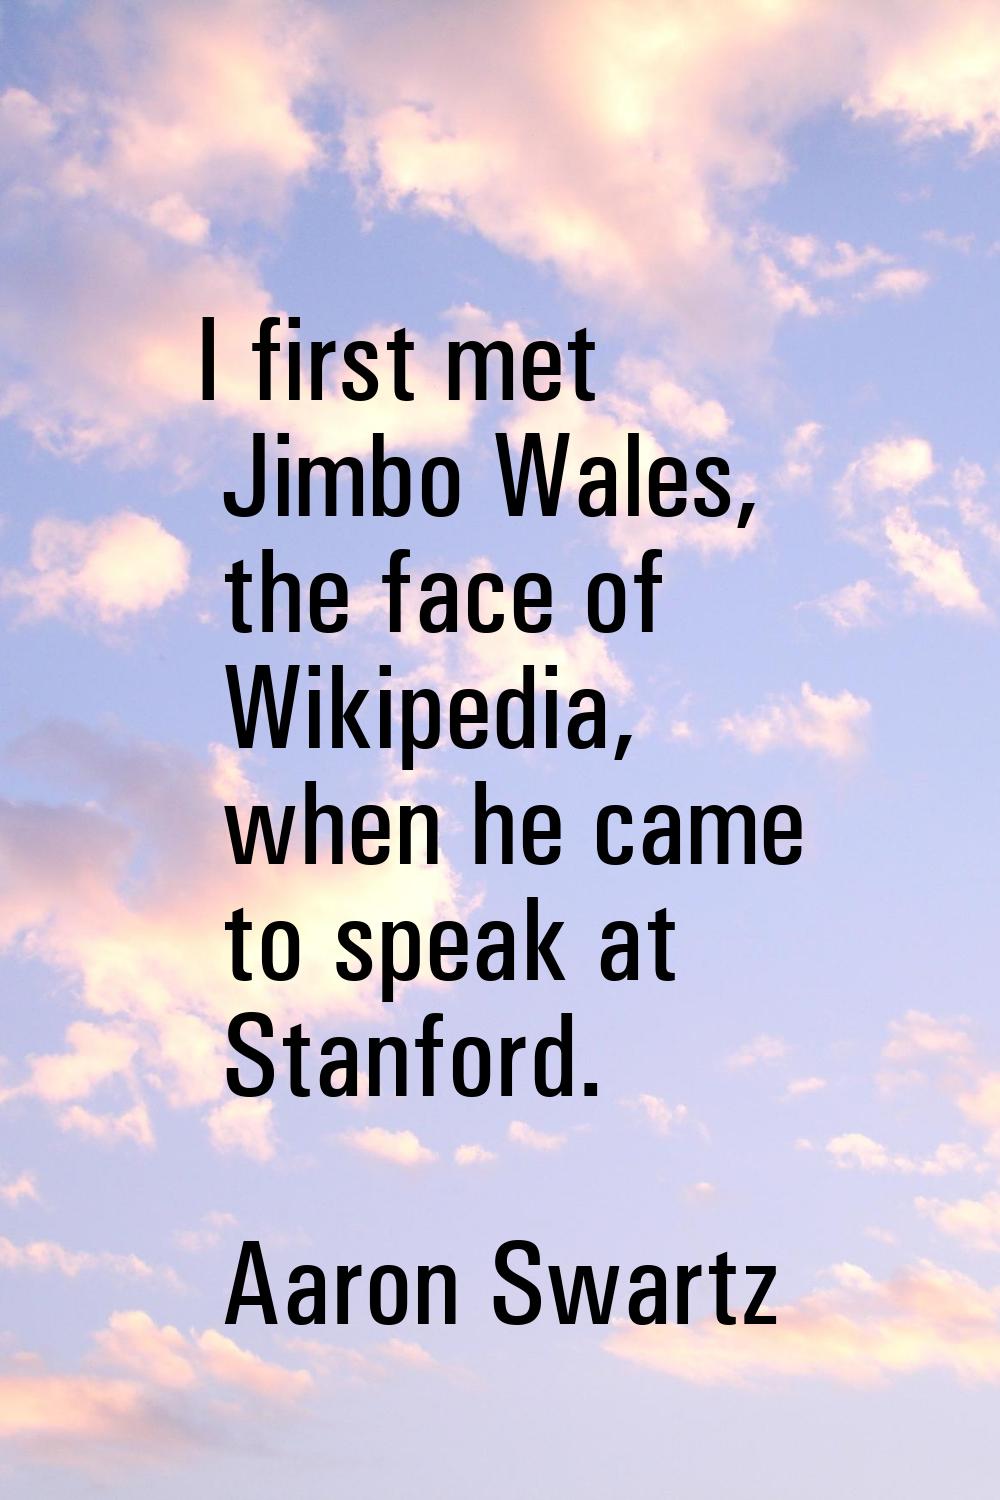 I first met Jimbo Wales, the face of Wikipedia, when he came to speak at Stanford.